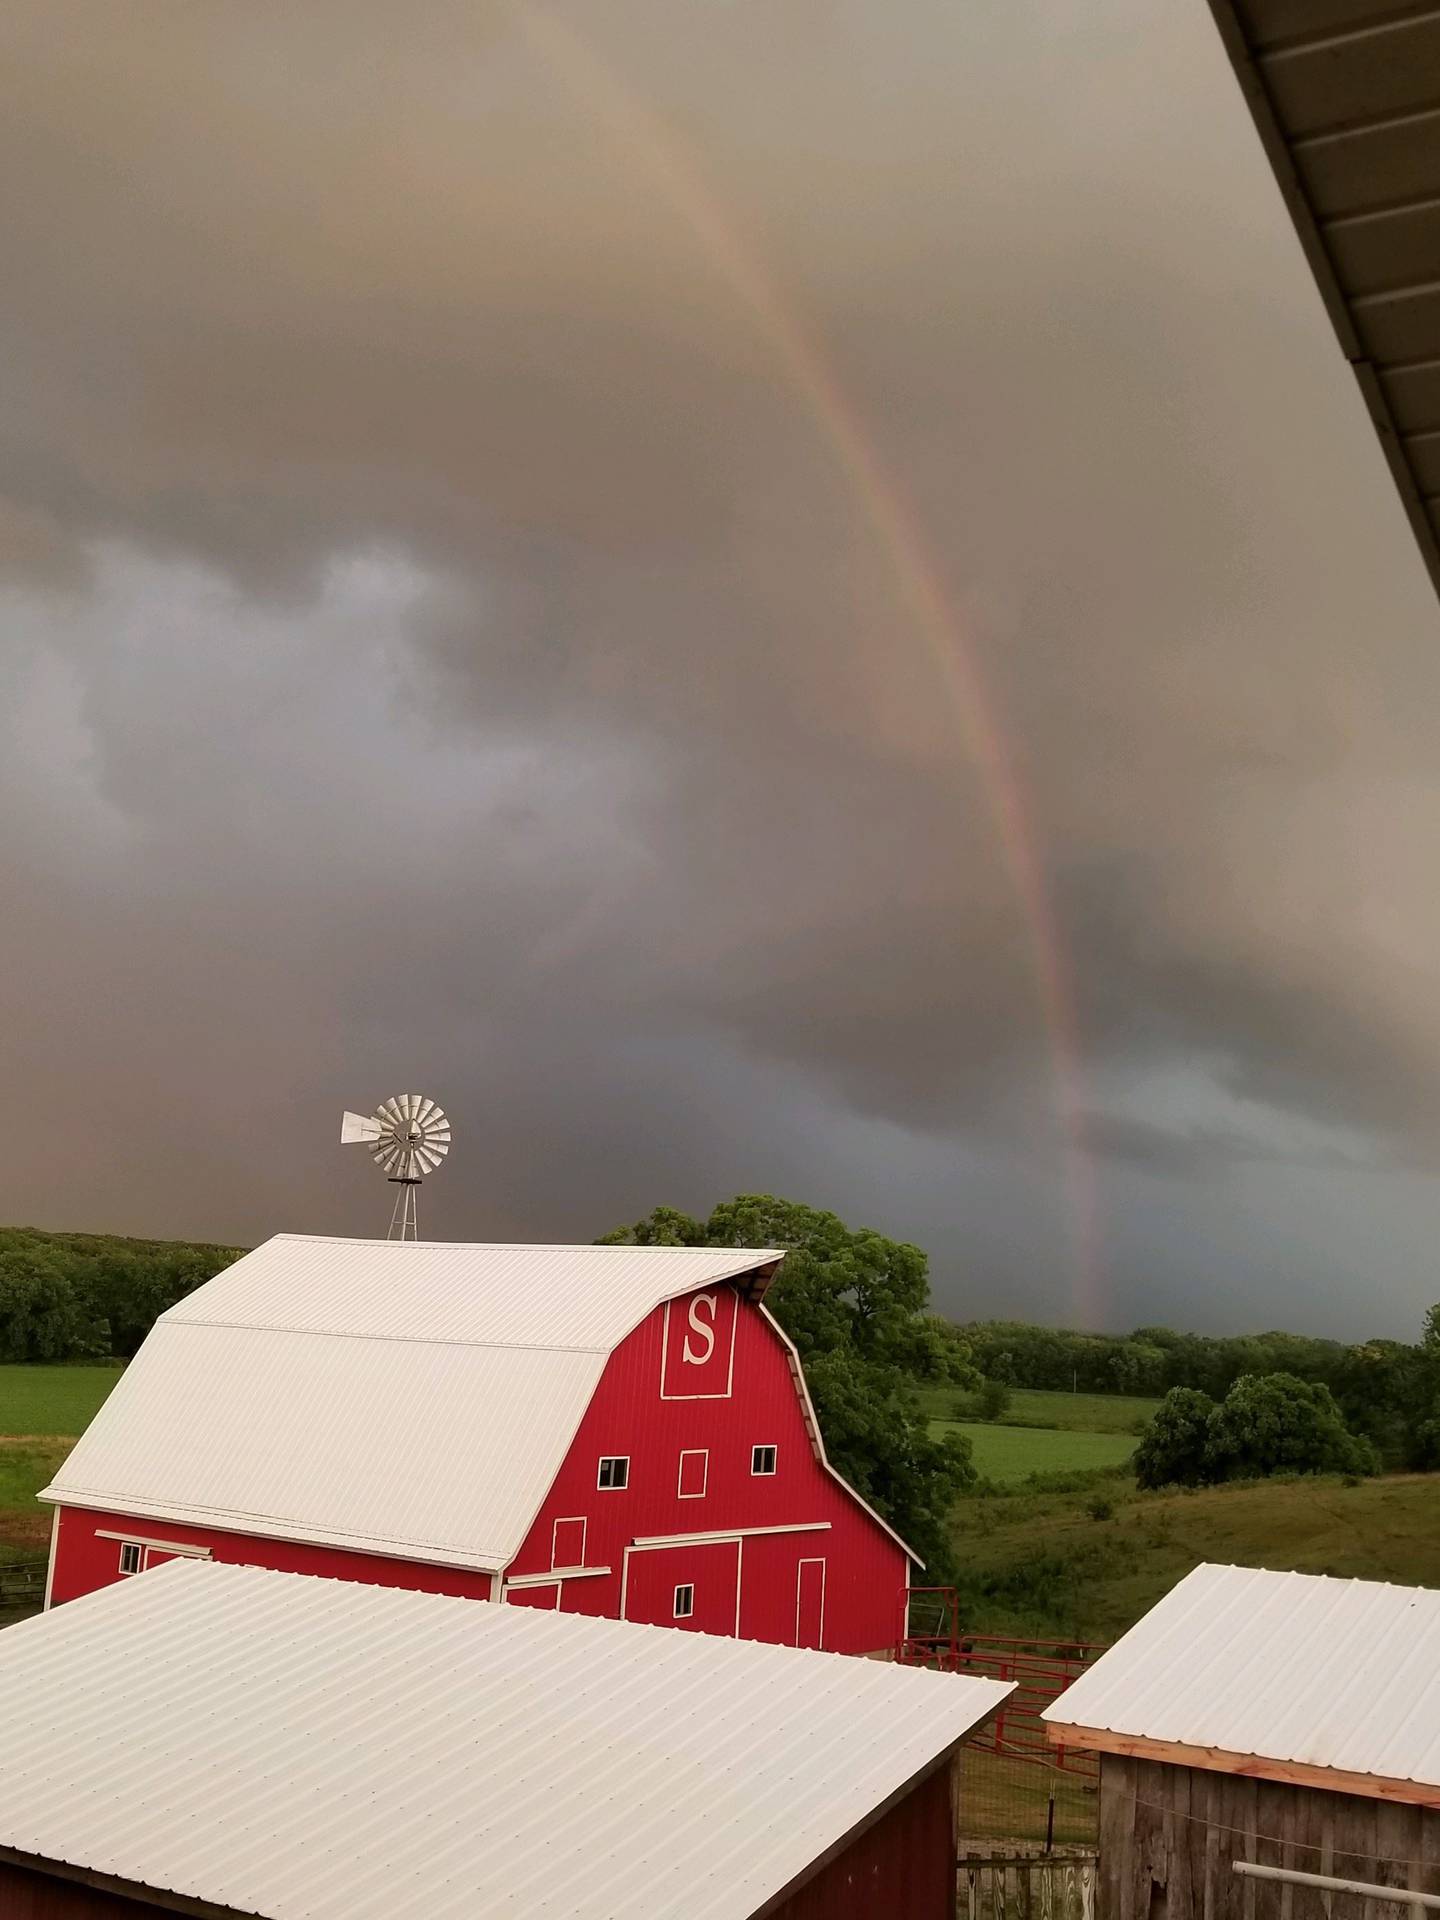 “Favorite farm photo” — Rodney Seaton: “Even a rainbow still shines over the windmill and barn on a cloudy day.”